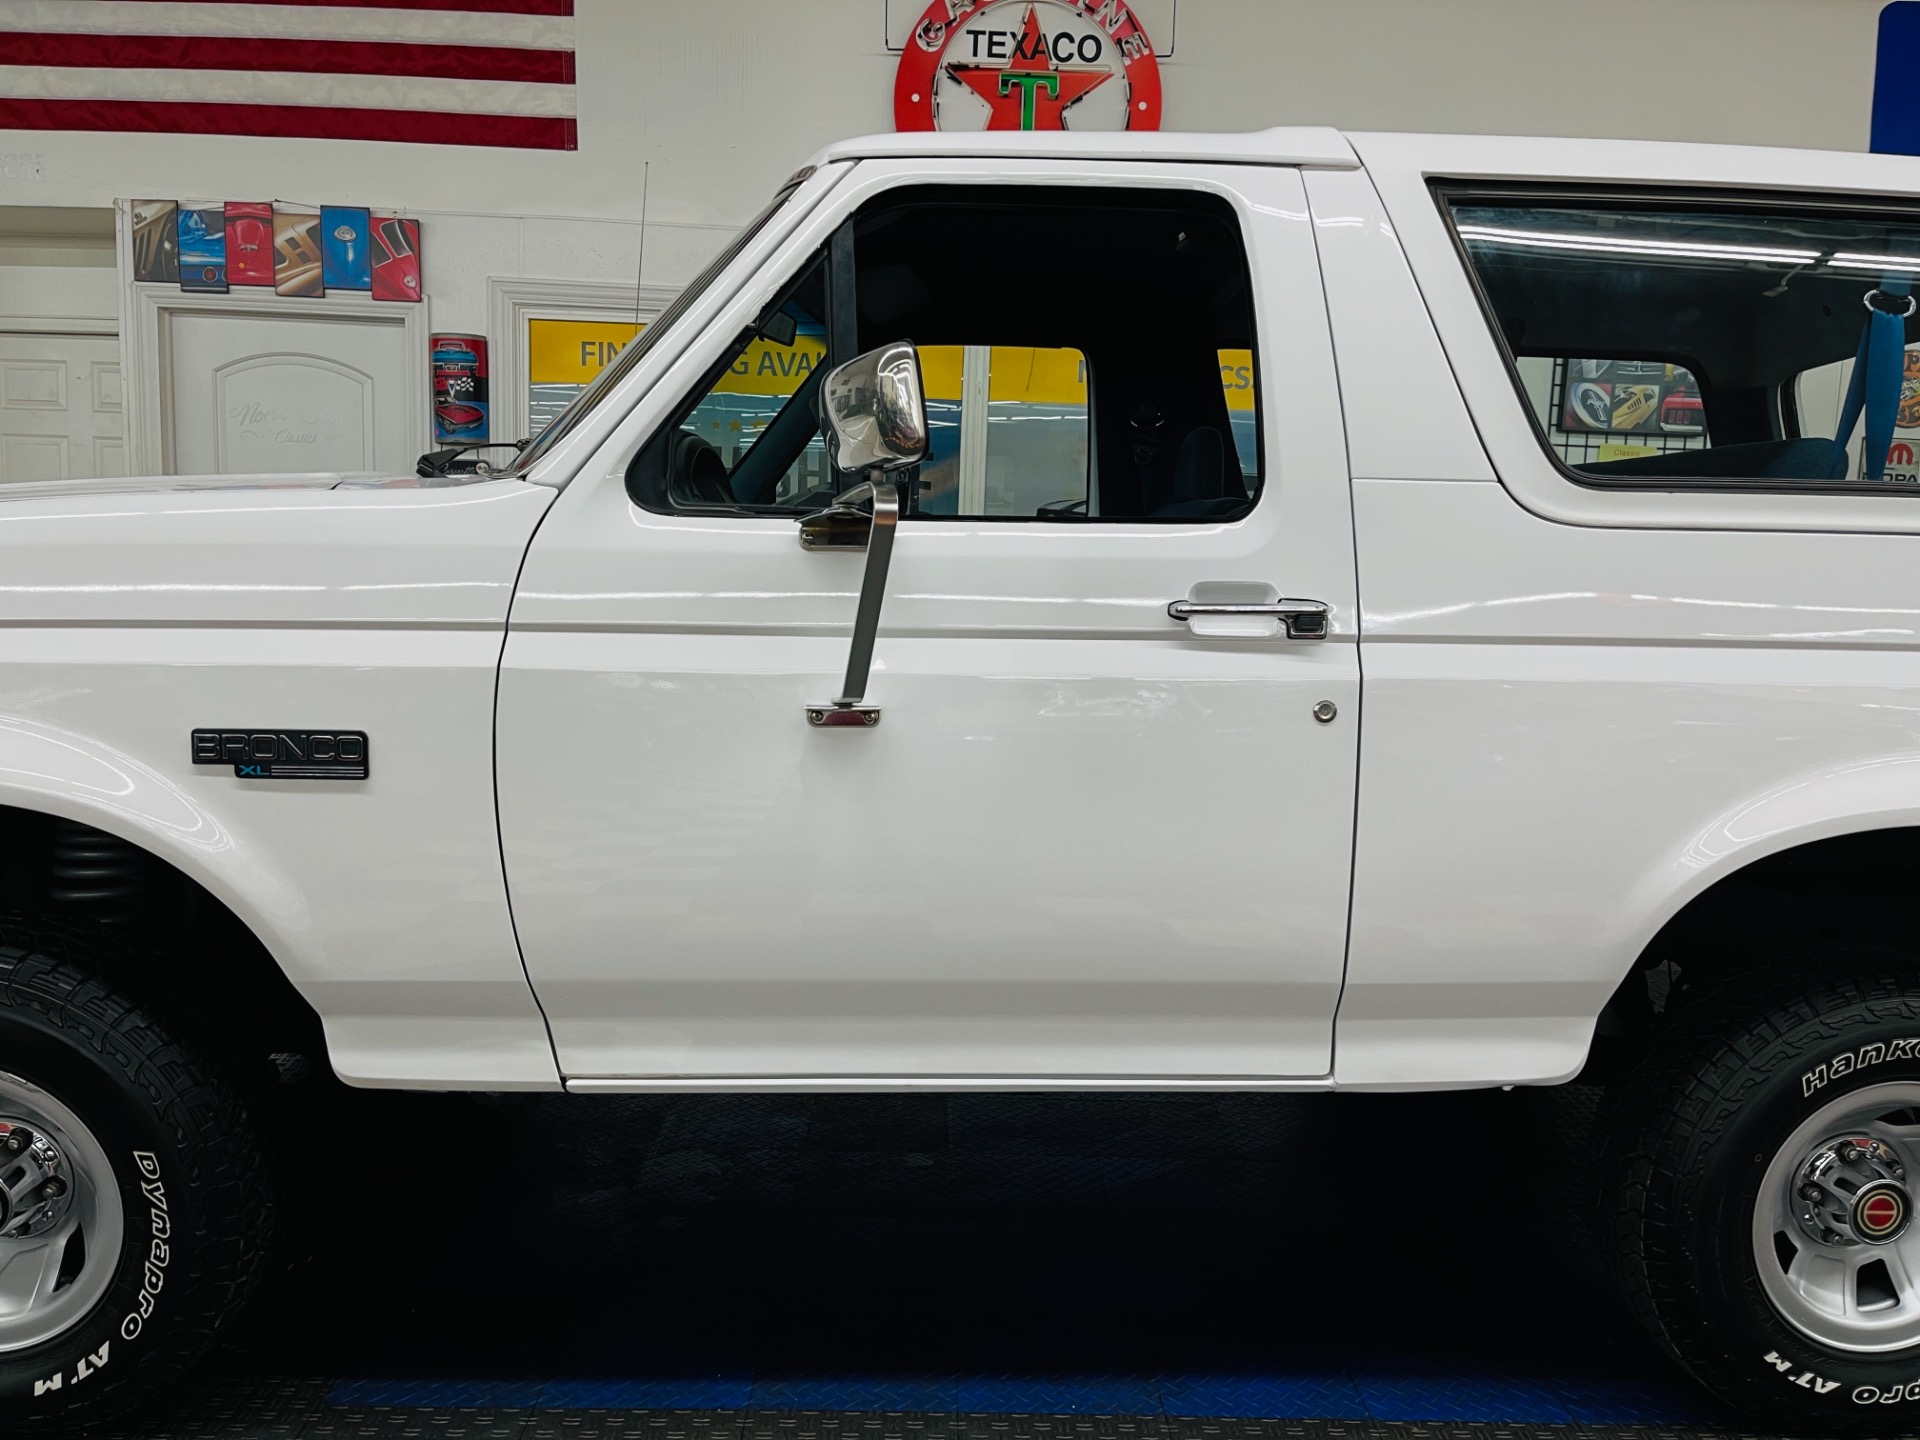 Used 1994 Ford Bronco XL - SEE VIDEO For Sale (Sold)